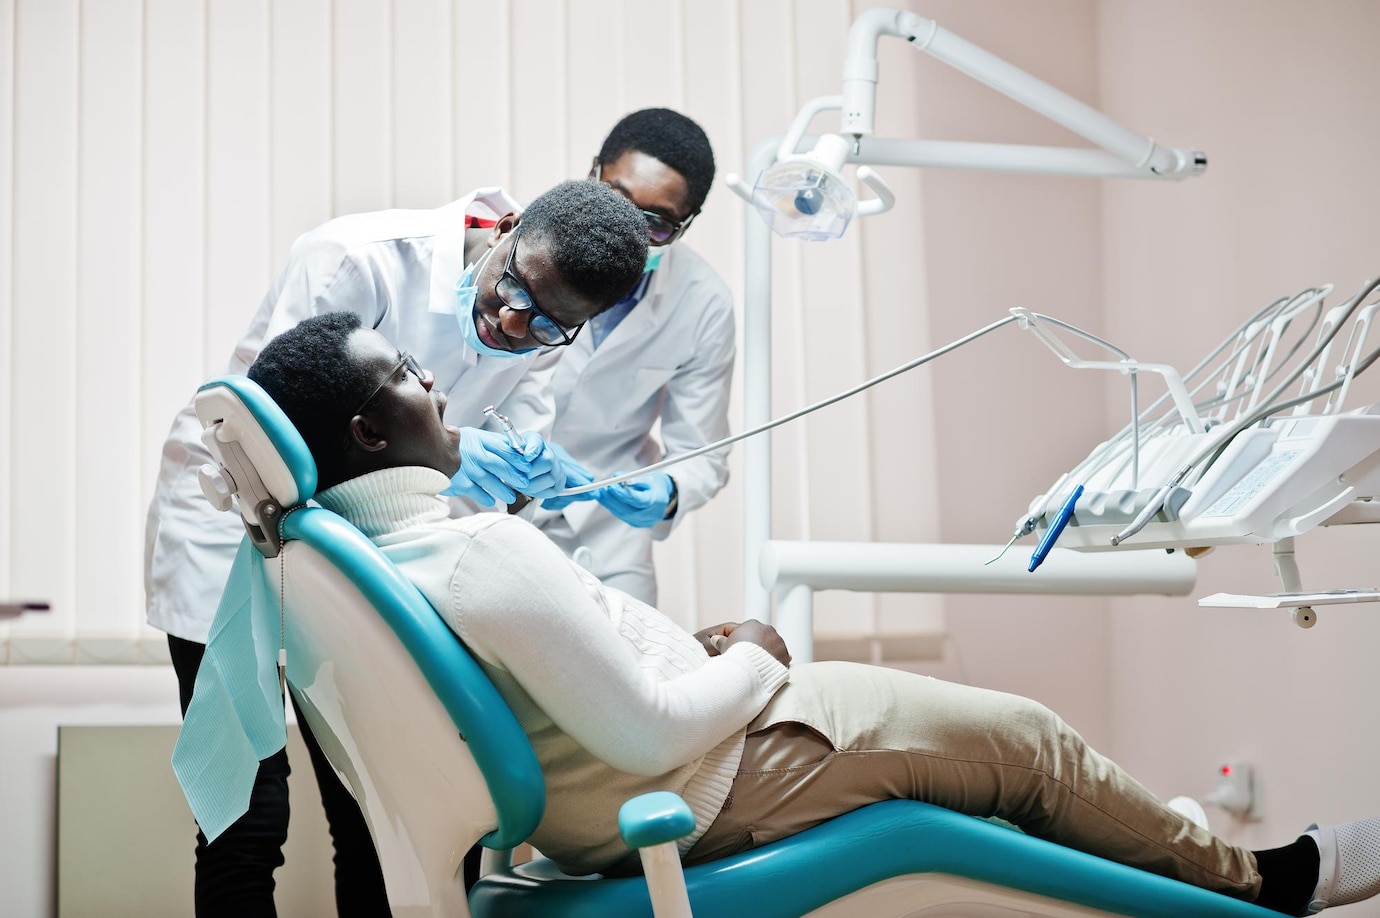 african-american-man-patient-dental-chair-dentist-office-doctor-practice-concept-professional-dentist-helping-his-patient-dentistry-medical-drilling-patient-s-teeth-clinic_627829-13721